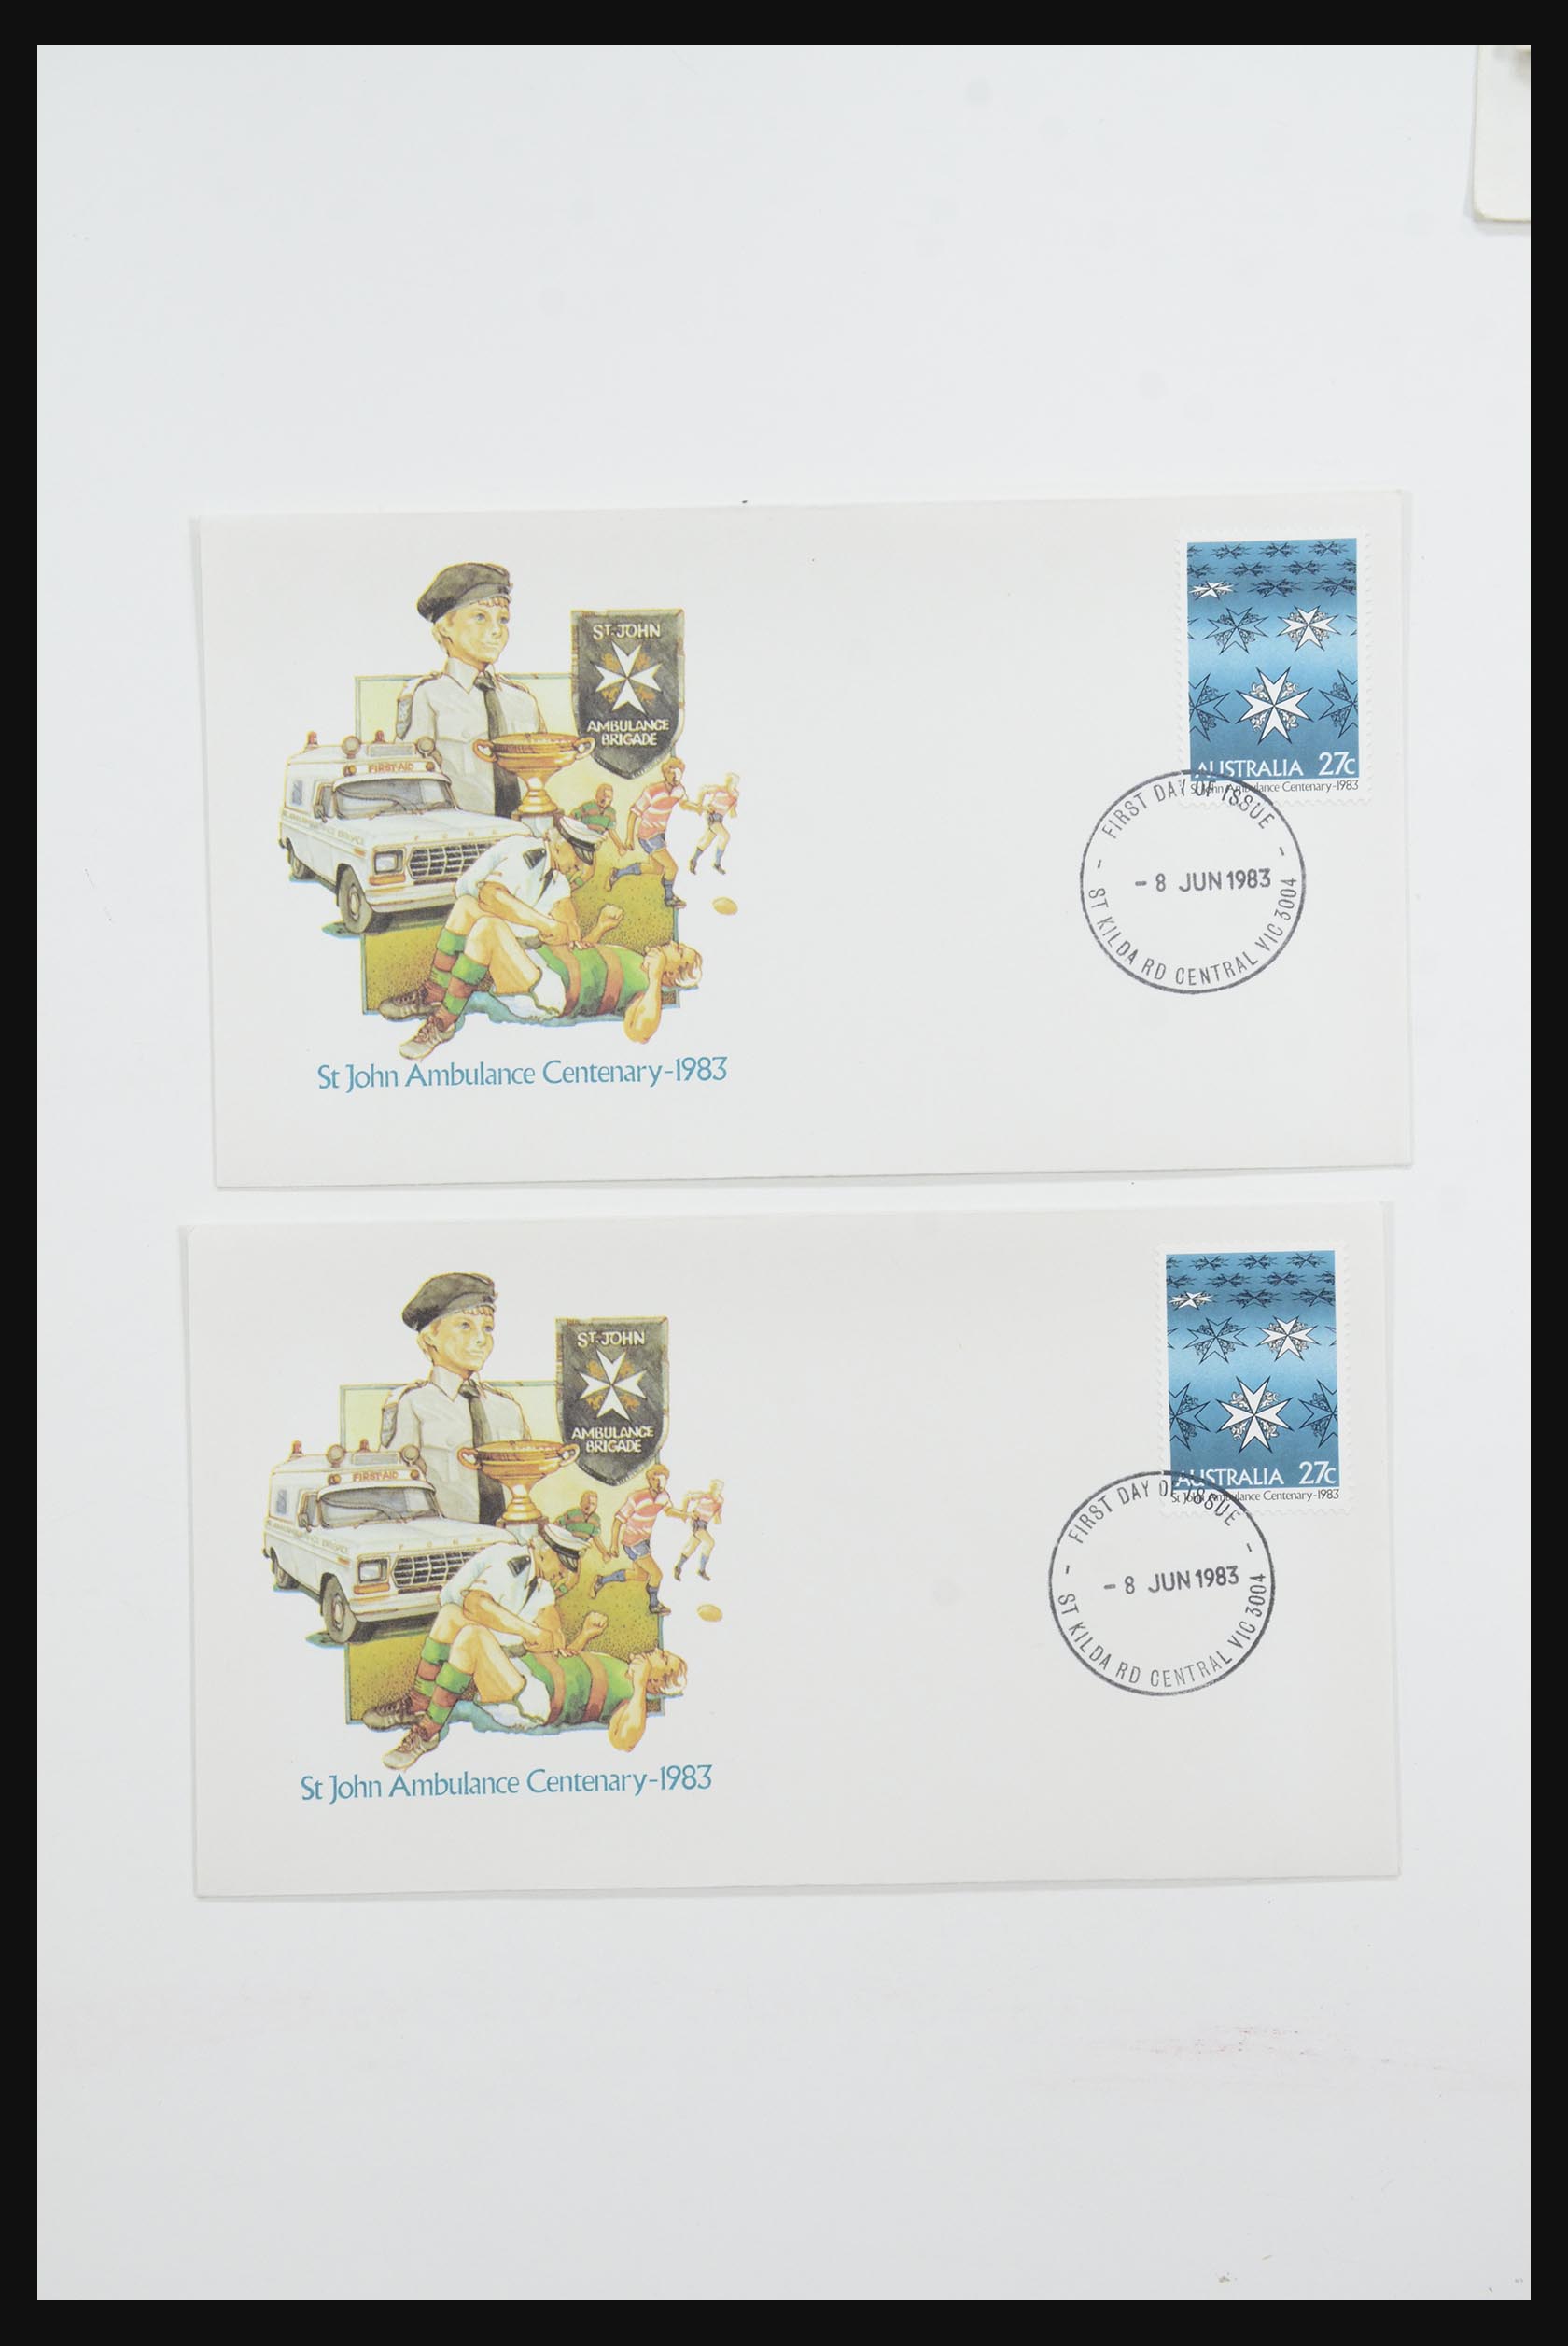 31726 035 - 31726 Great Britain and colonies covers and FDC's 1937-2001.